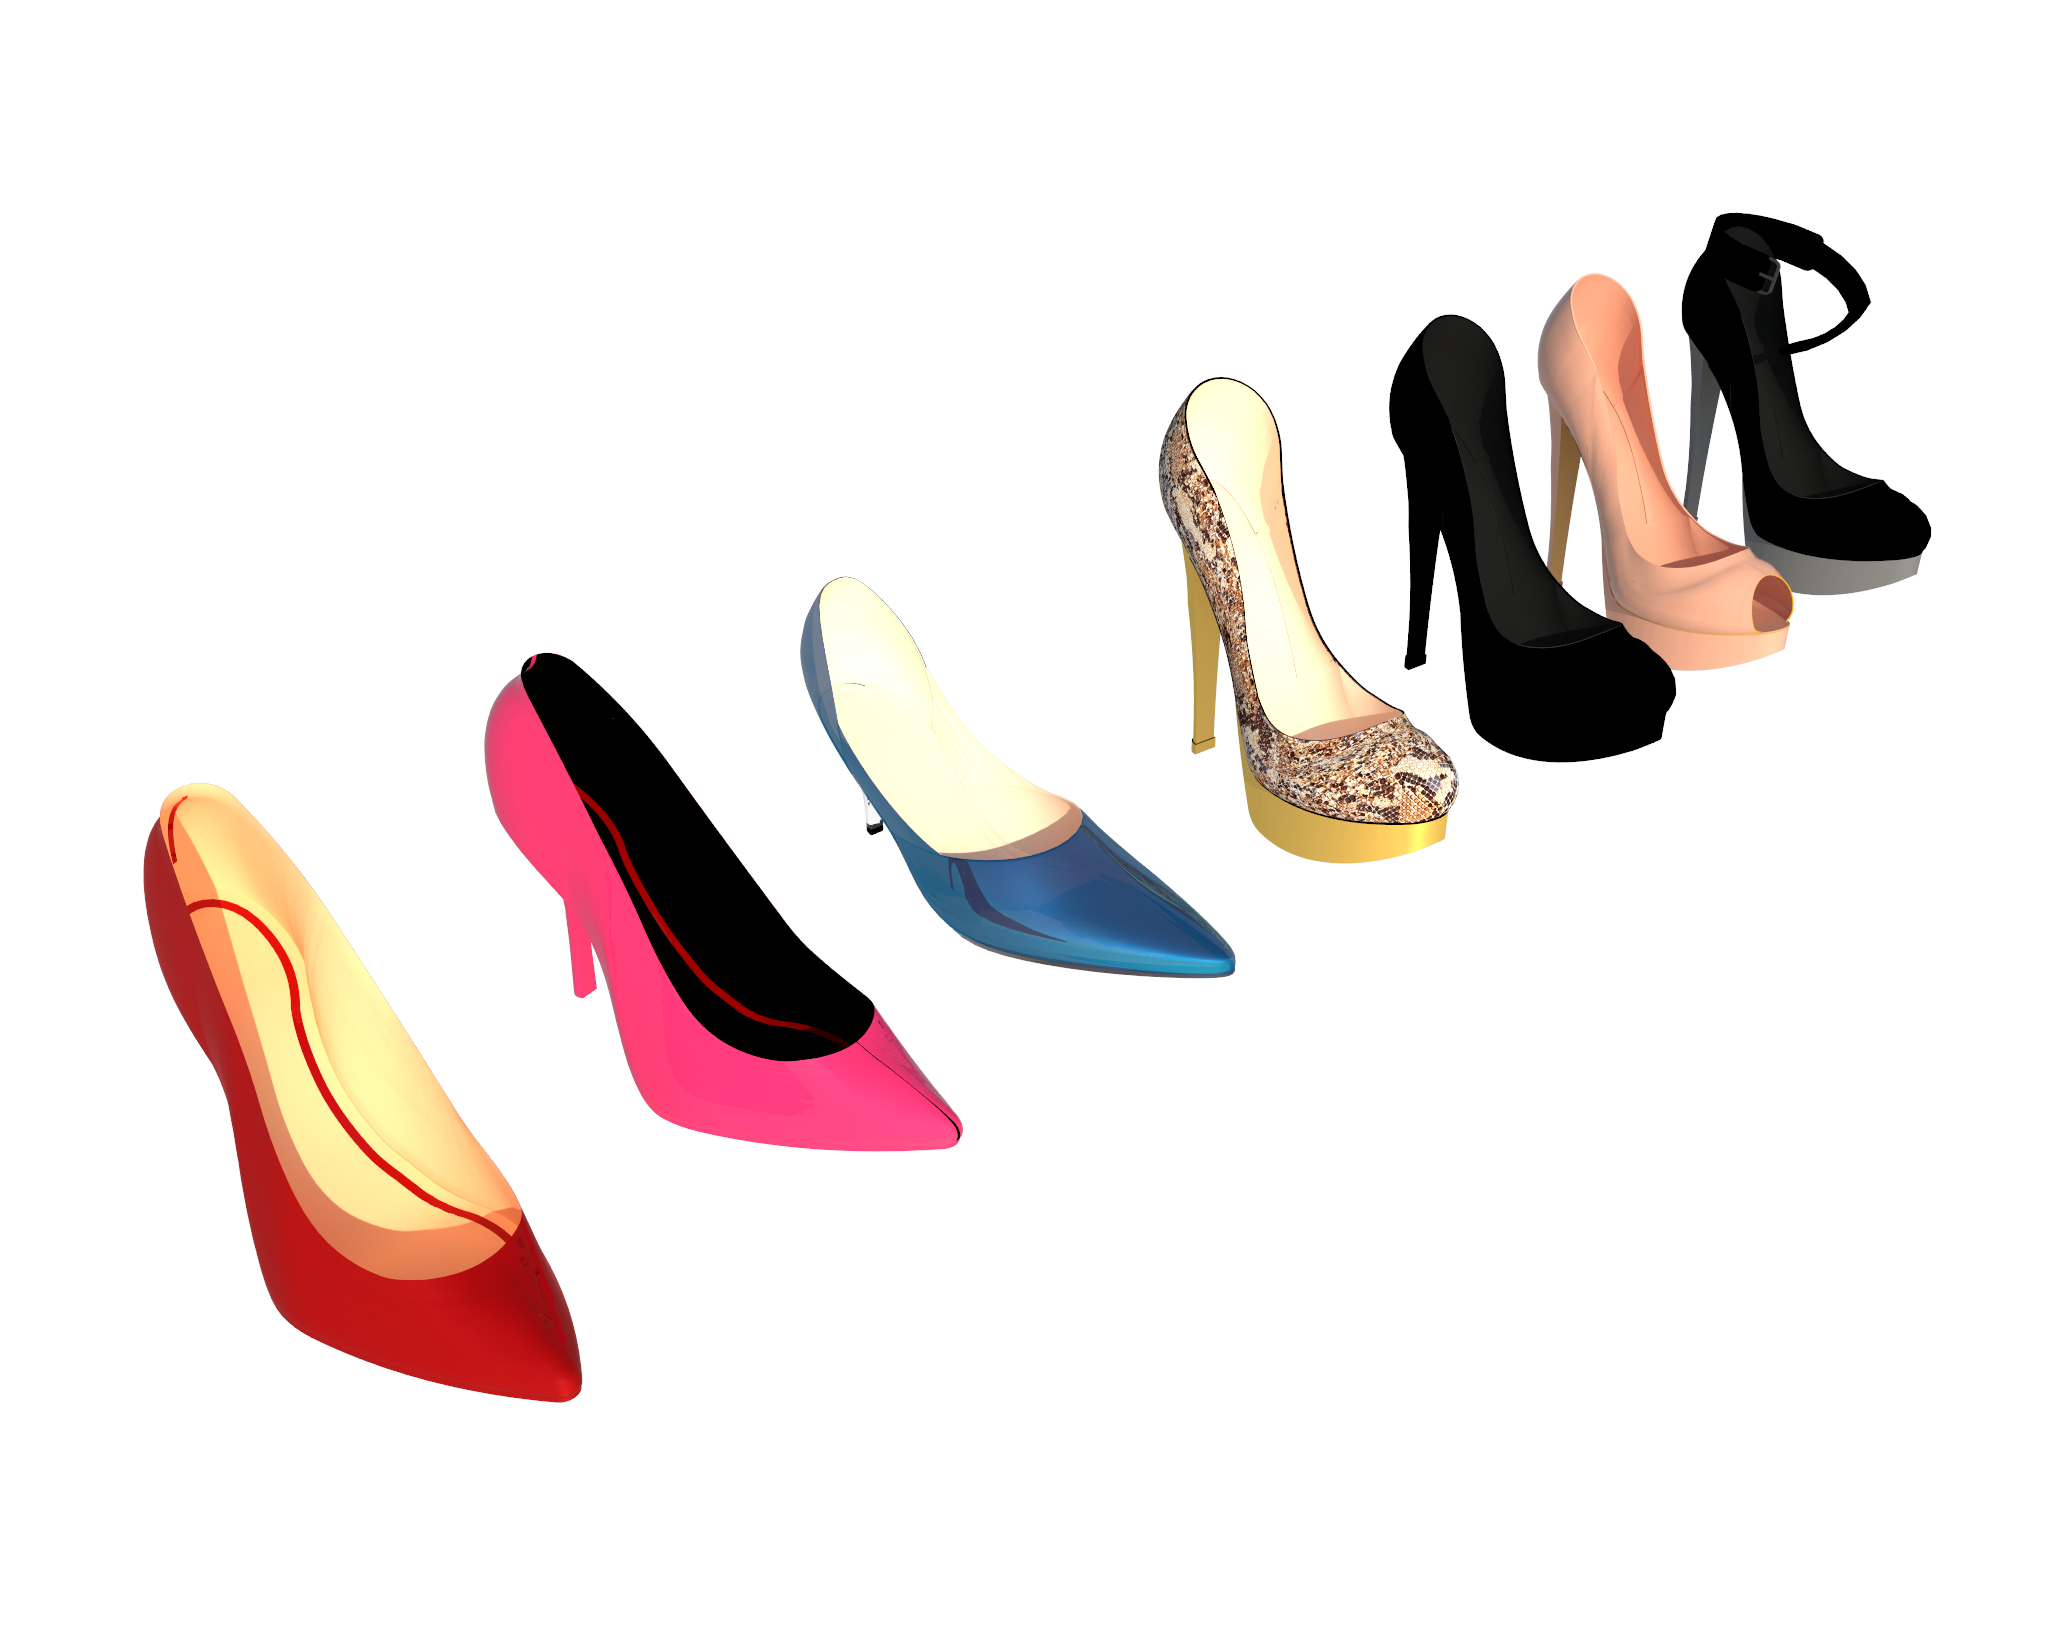 Eye-Candy is created for women. It is specially designed and manufactured with quality materials to provide footwear that is able to change colors